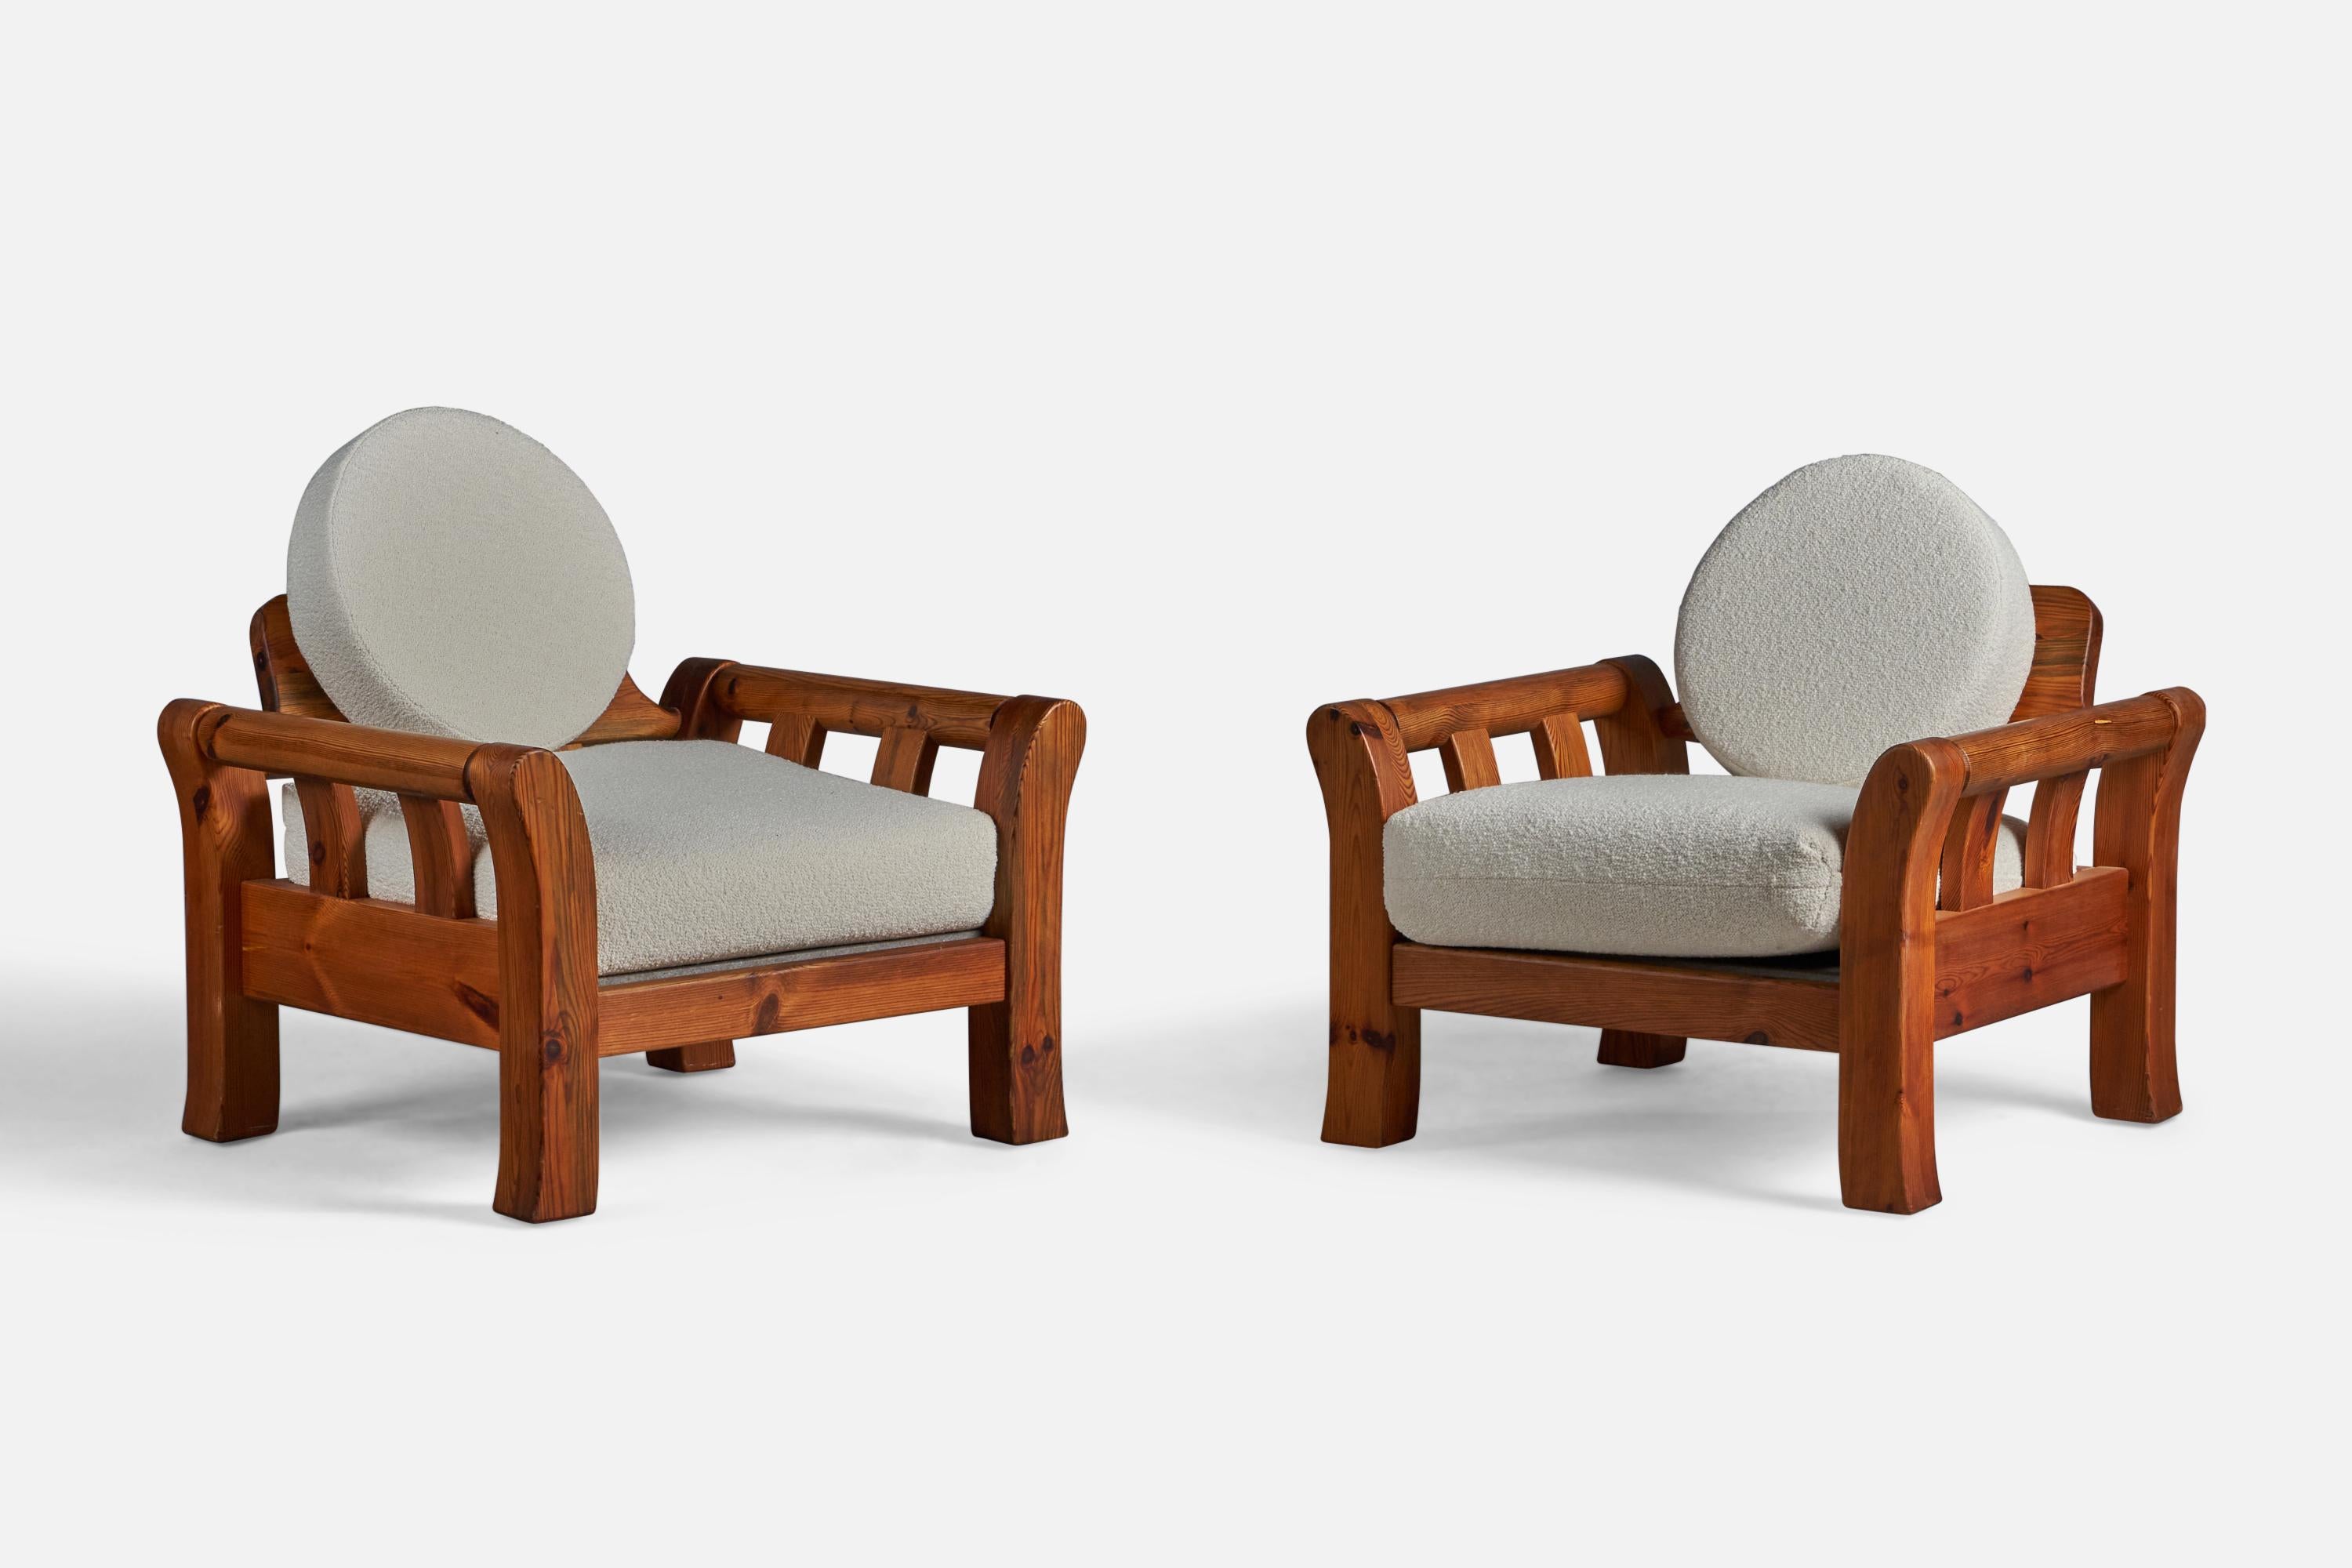 A pair of solid pine and white bouclé fabric lounge chairs, designed and produced in Denmark, 1960s.

16